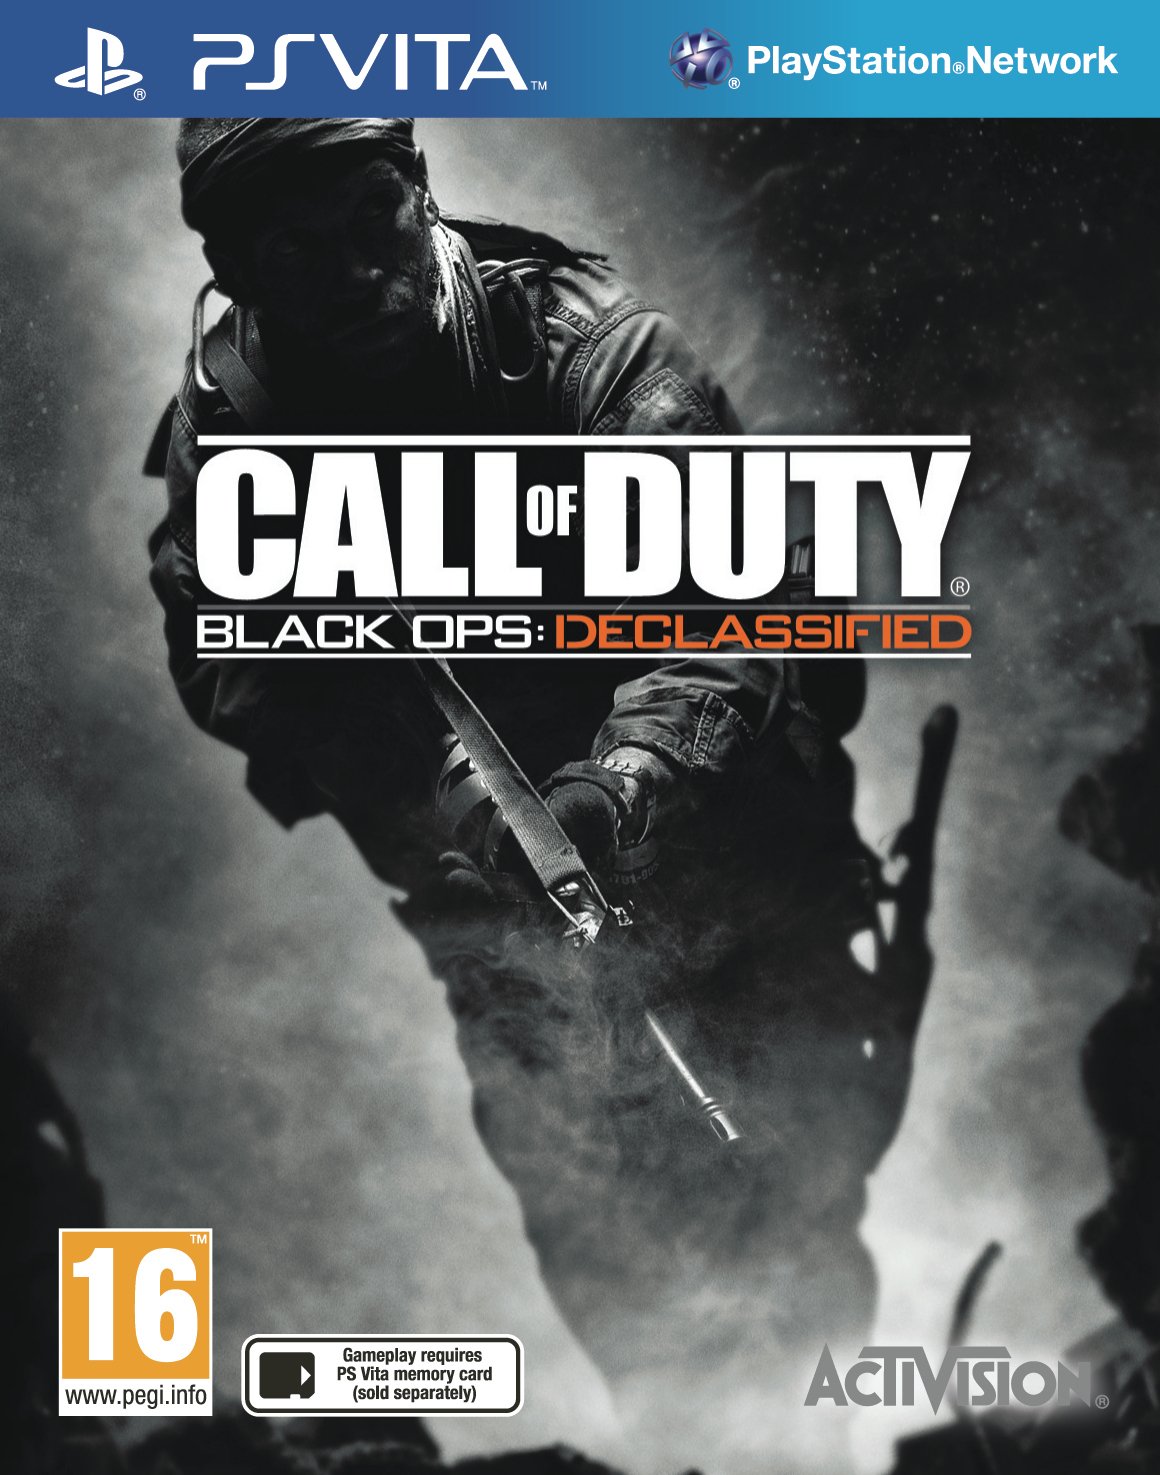 Call of Duty: Black Ops Ps Vita Game